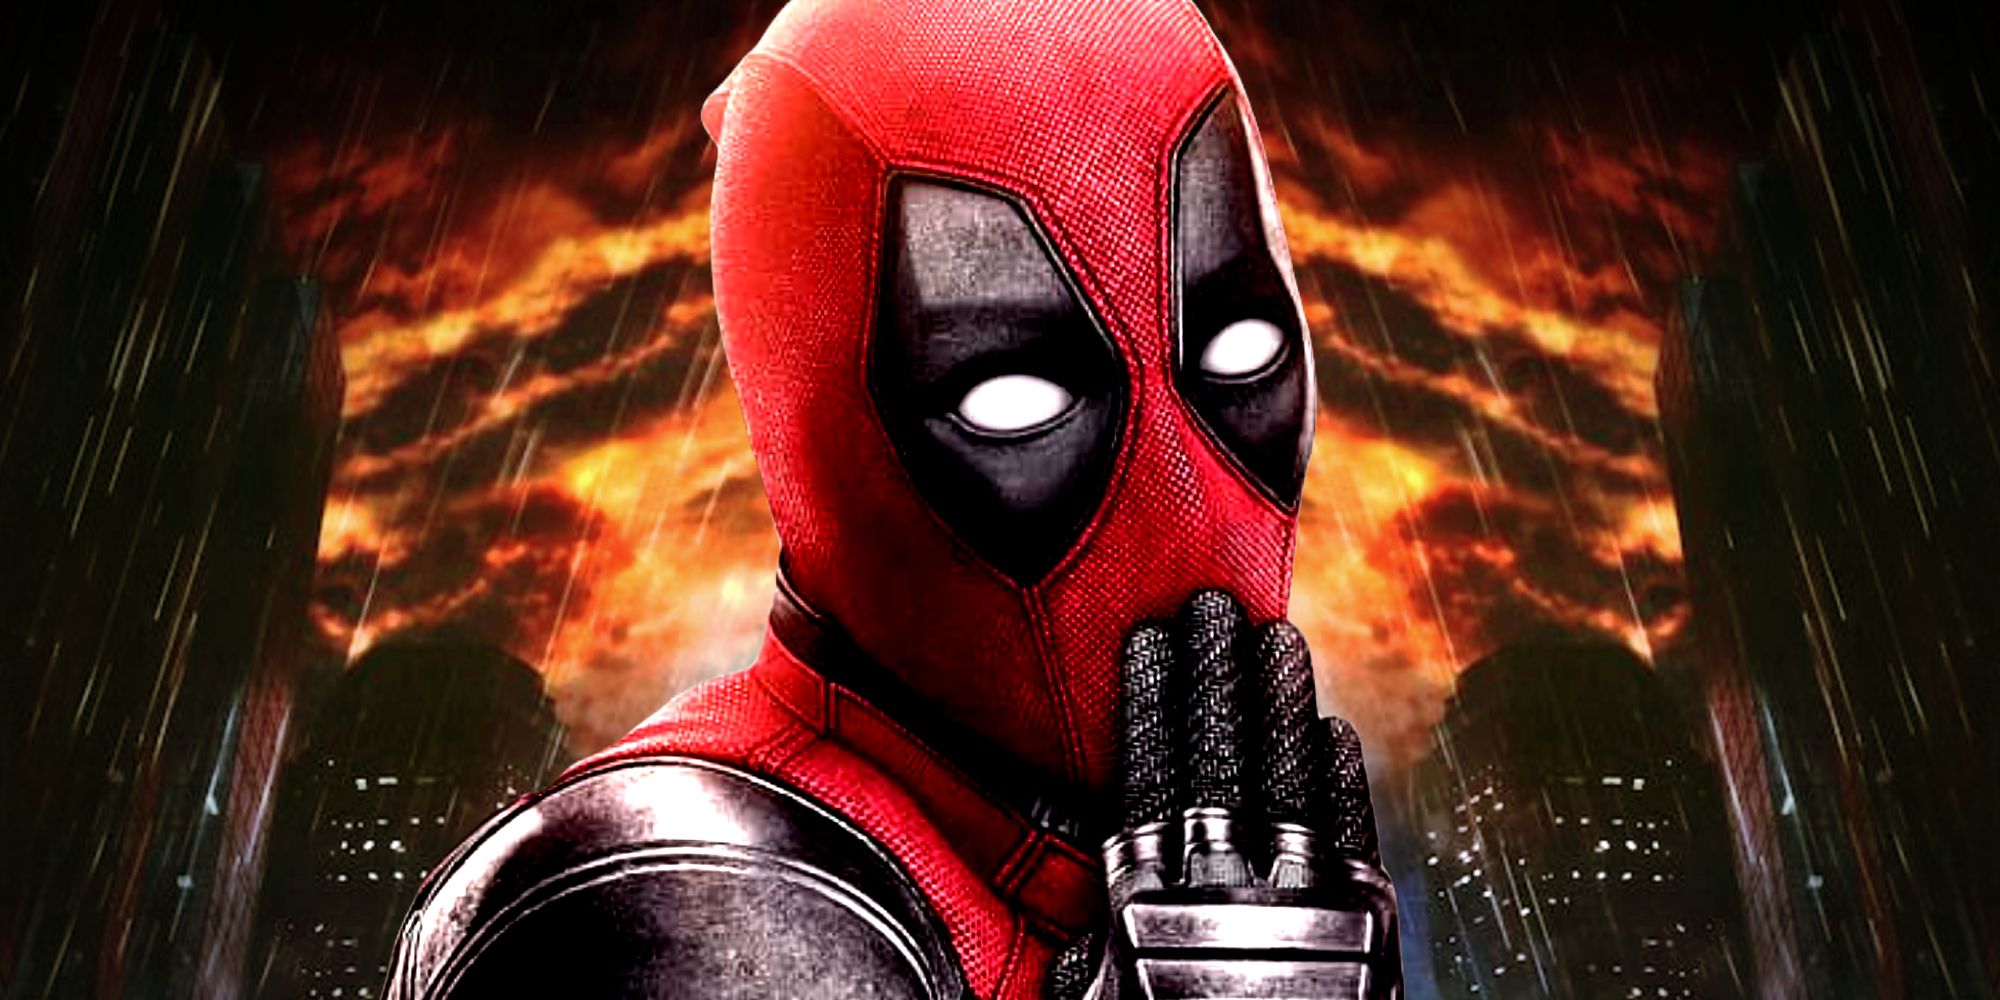 Deadpool Covers his Mouth in front of the Daredevil 2003 New York Skyline Poster